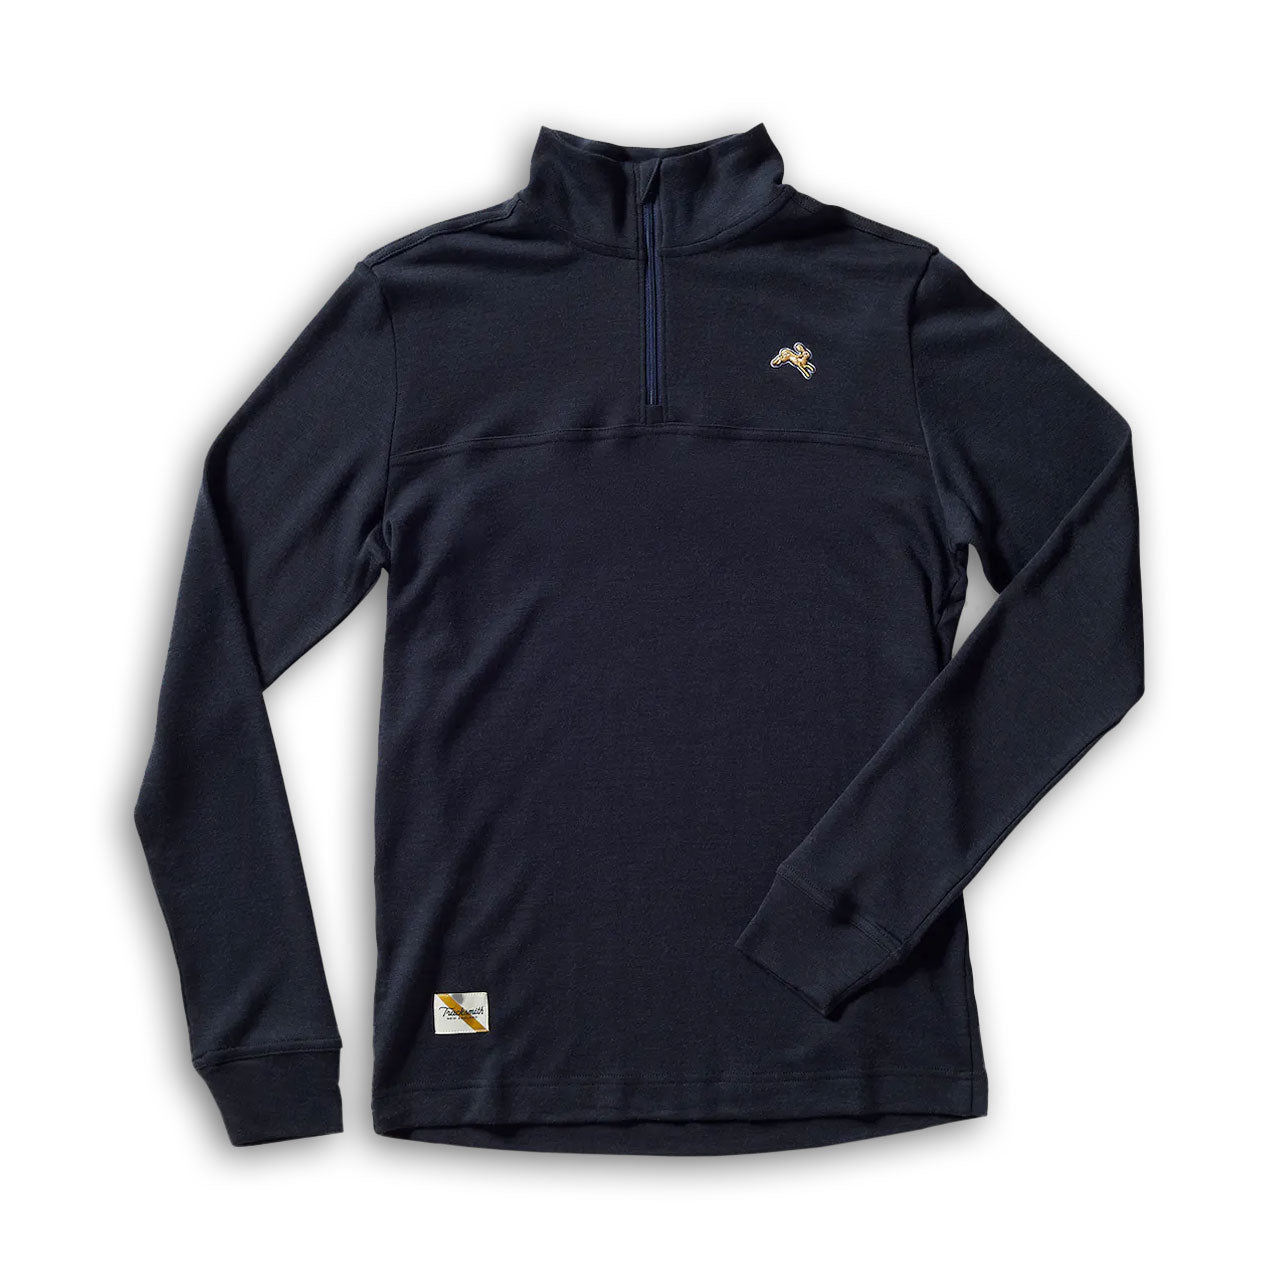 Tracksmith Downeaster Running Pull Over